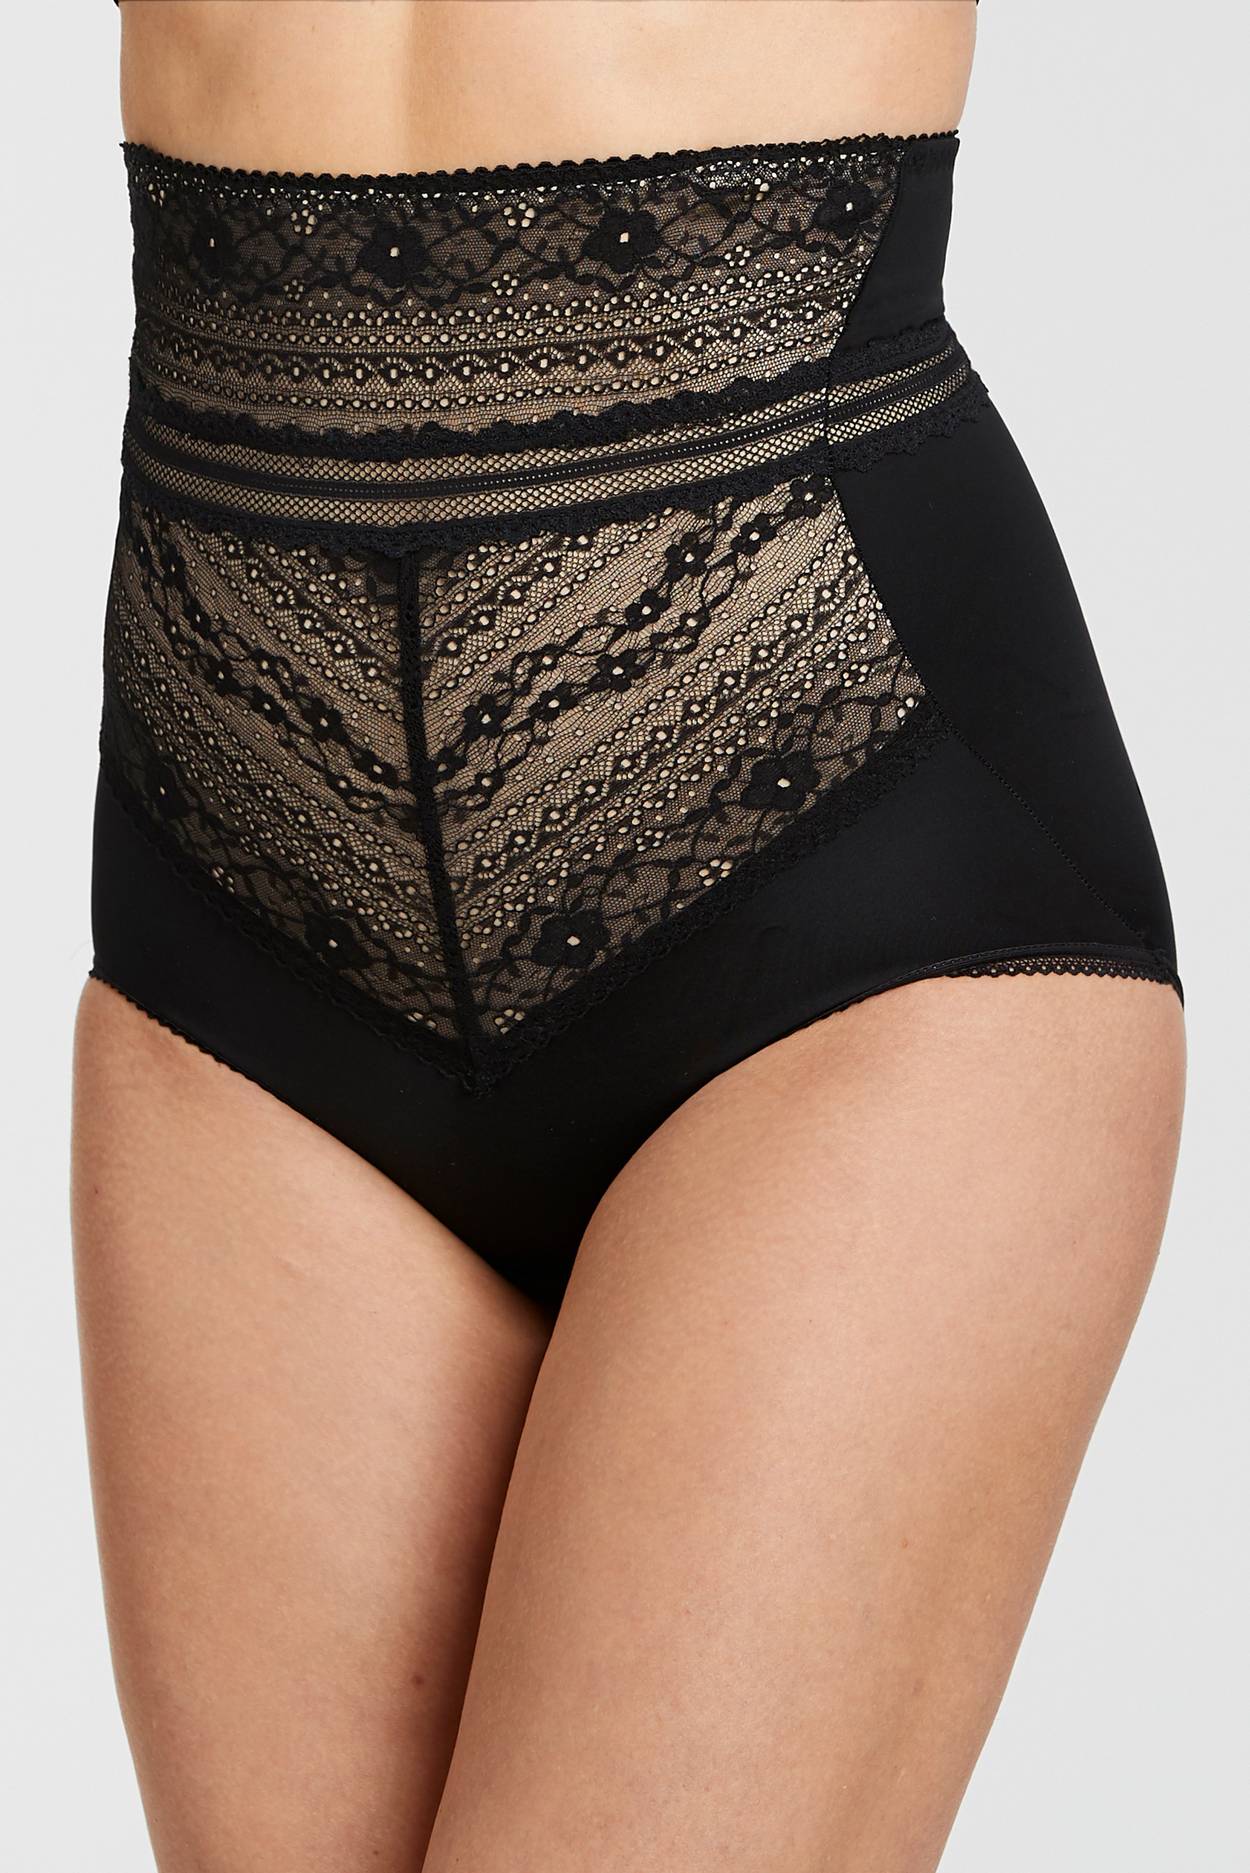 Lace Vision Miederhose mit hoher Taille